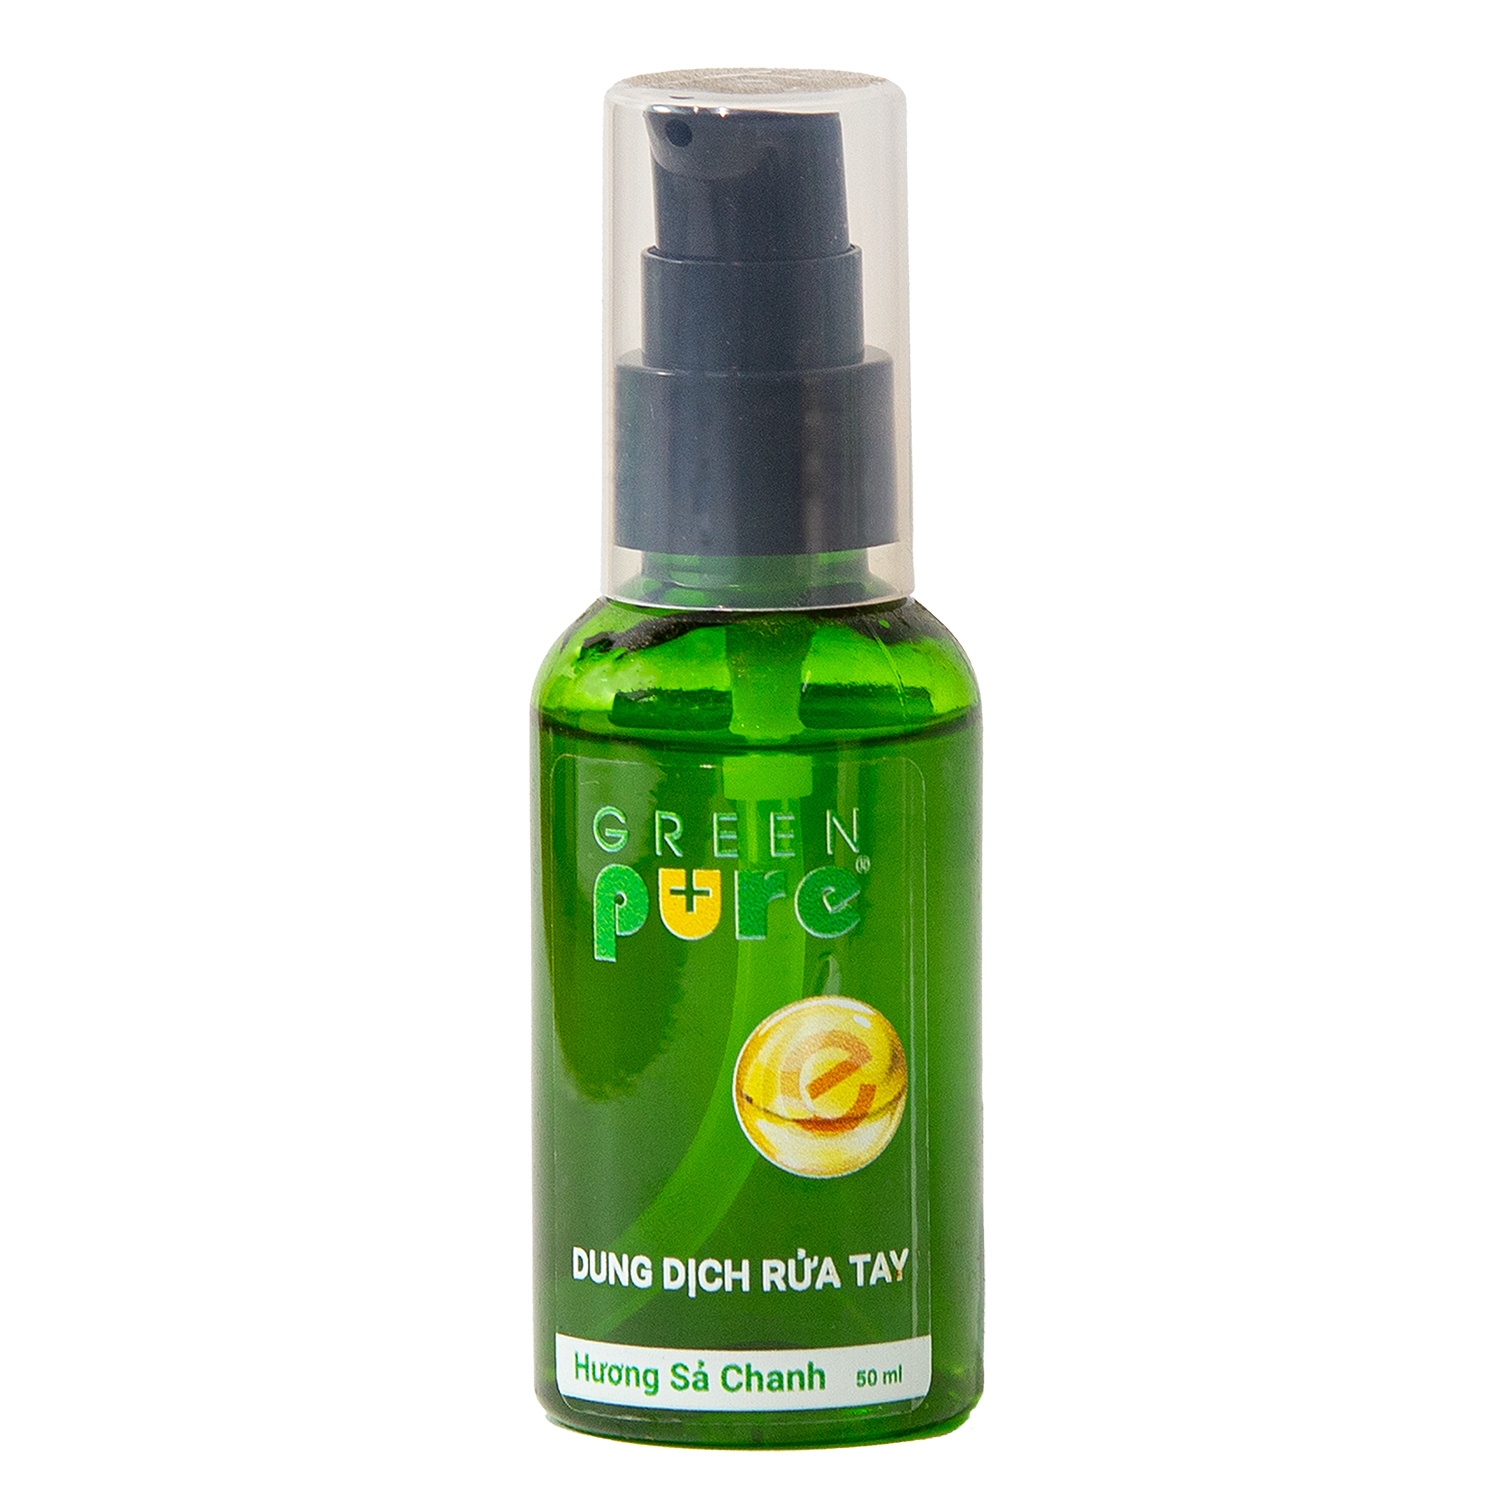 Dung dịch rửa tay Pure 50ml